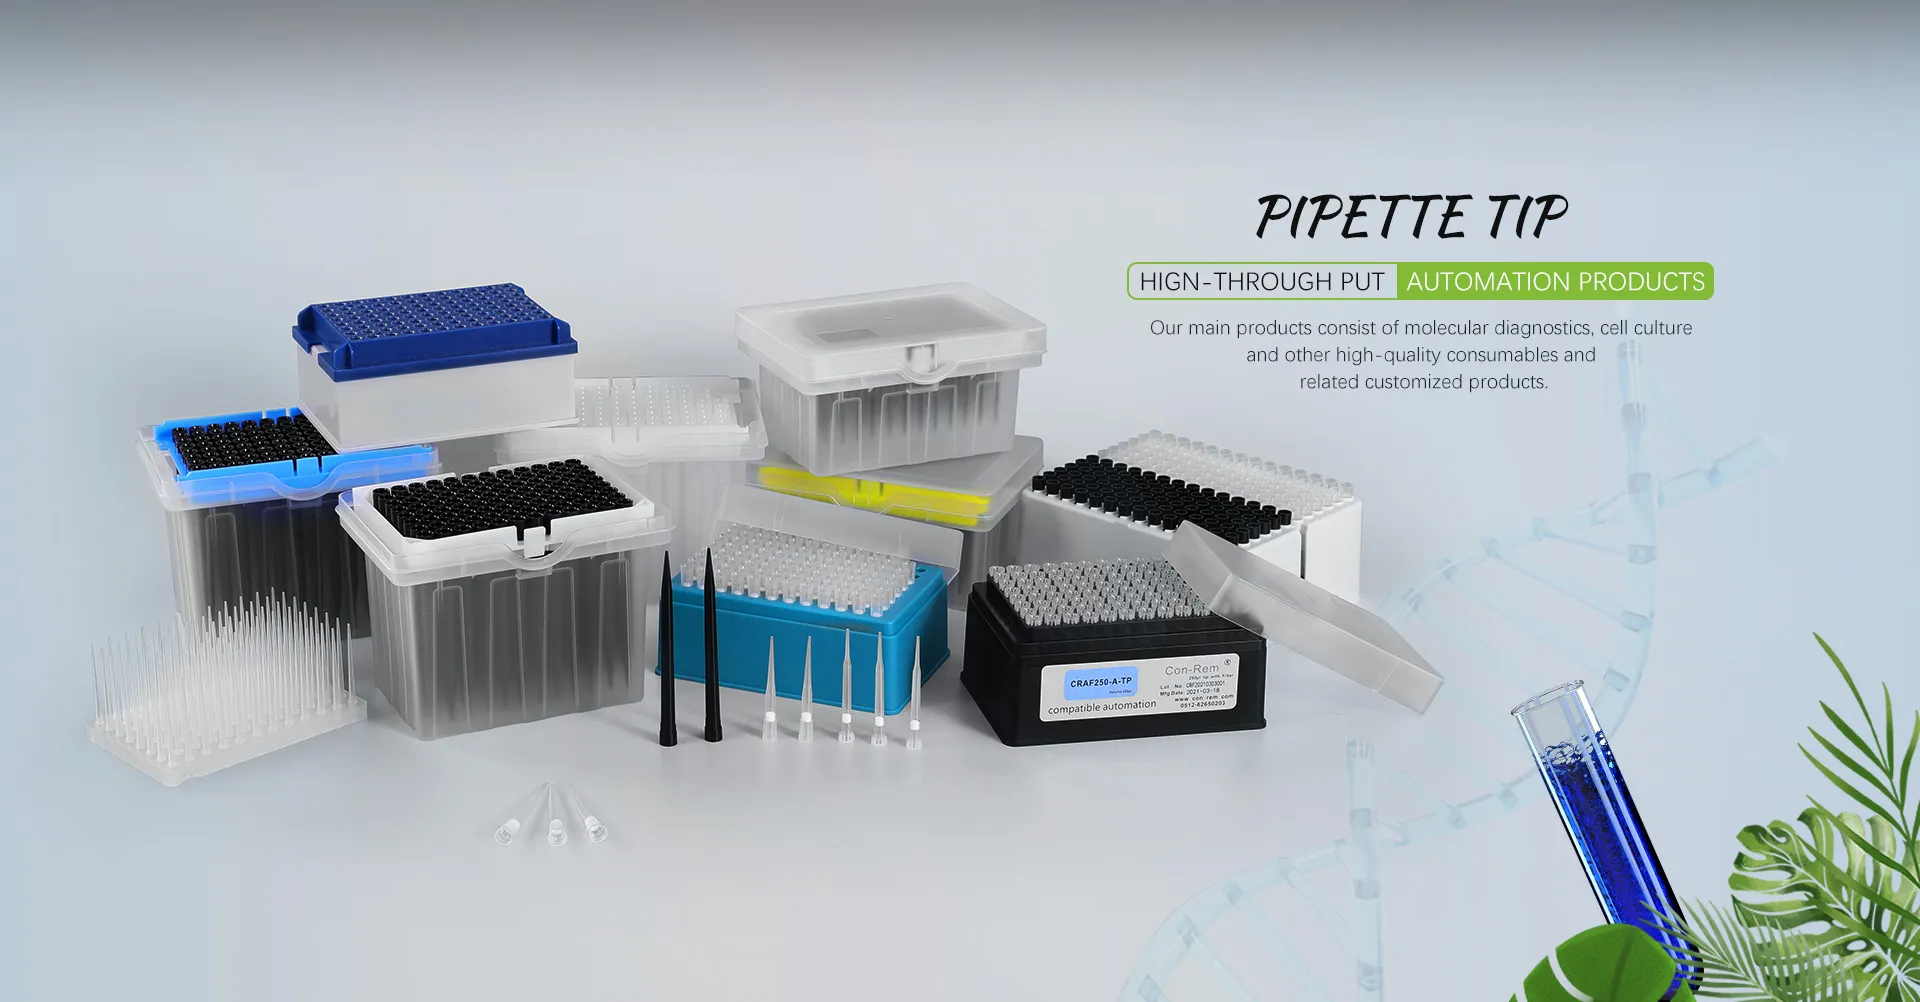 China Automated Pipette Tip Manufacturers ug Suppliers